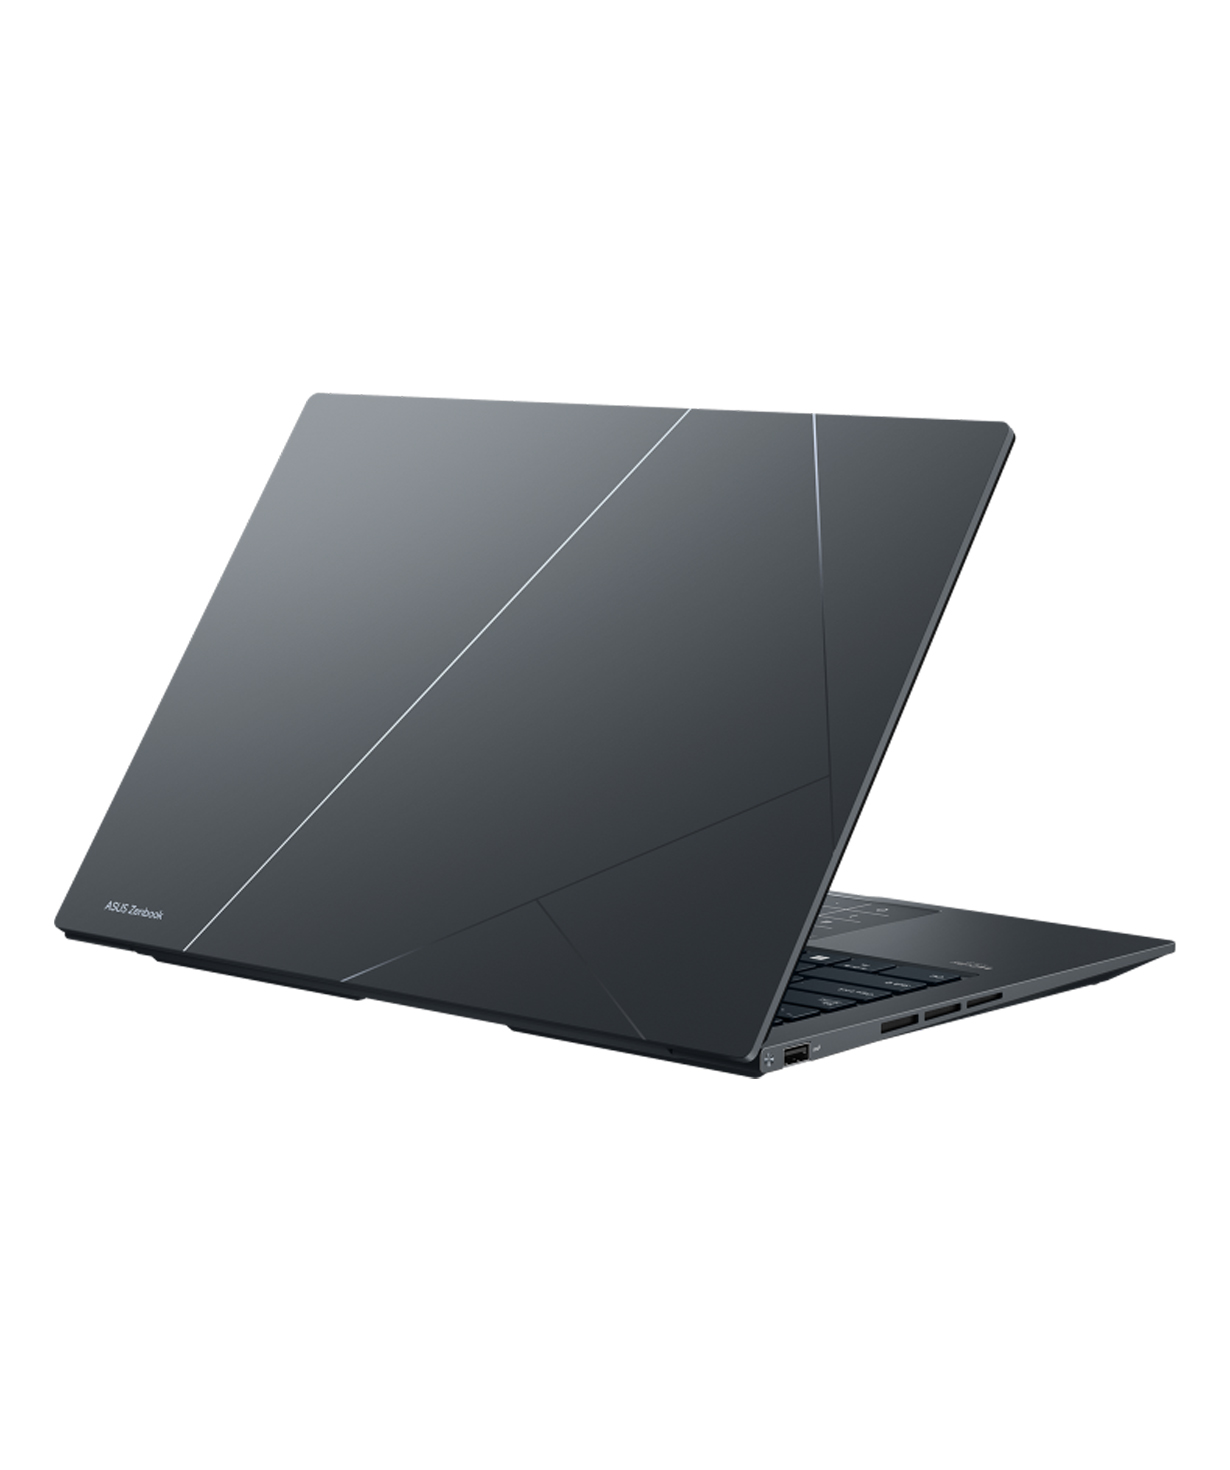 Ультрабук Asus Zenbook 14X Touch (8GB, 512GB SSD, Core i5 13500H, 14` 2880x1800, black)